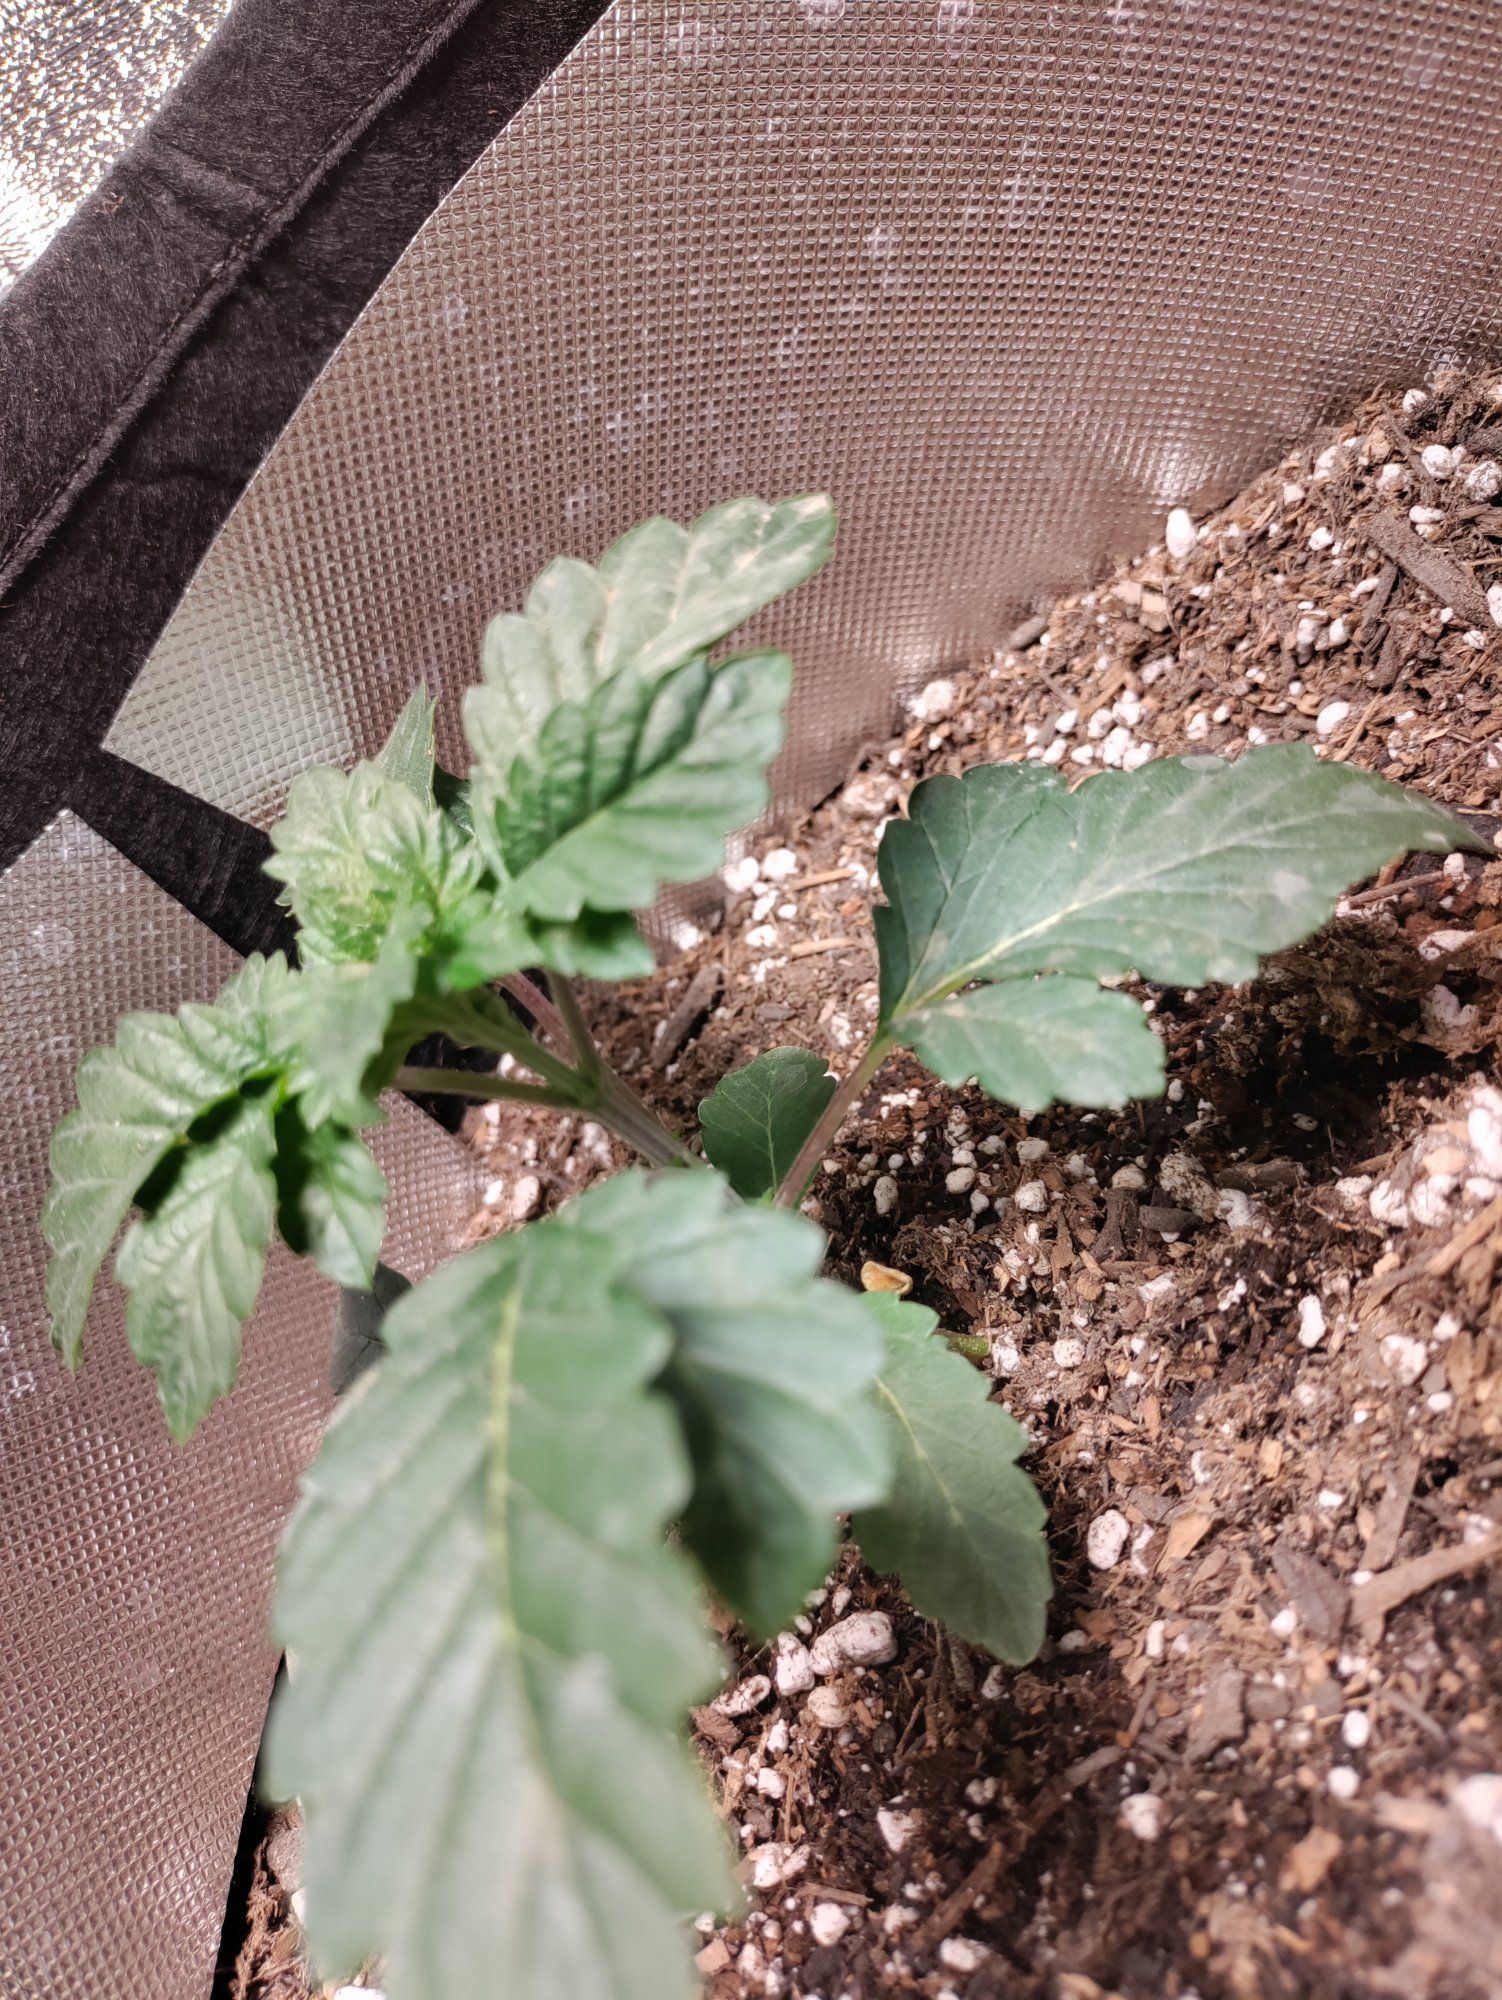 Help plant has wrinkled leaves and its growth slowed down 3